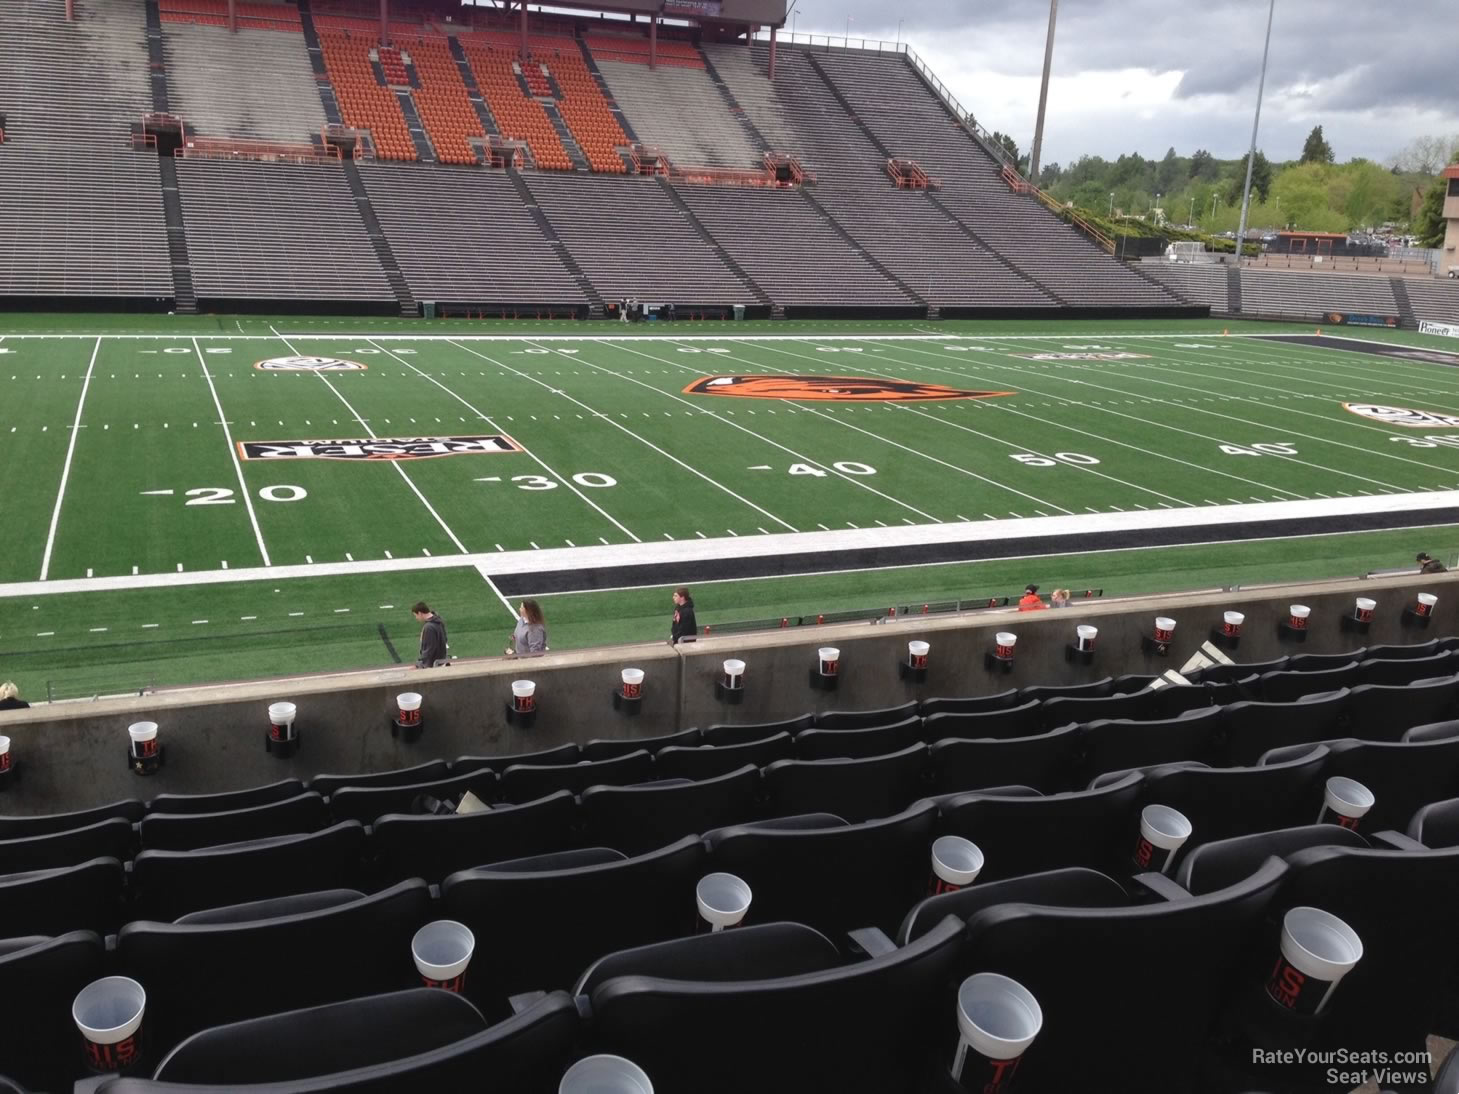 section 118, row 21 seat view  - reser stadium